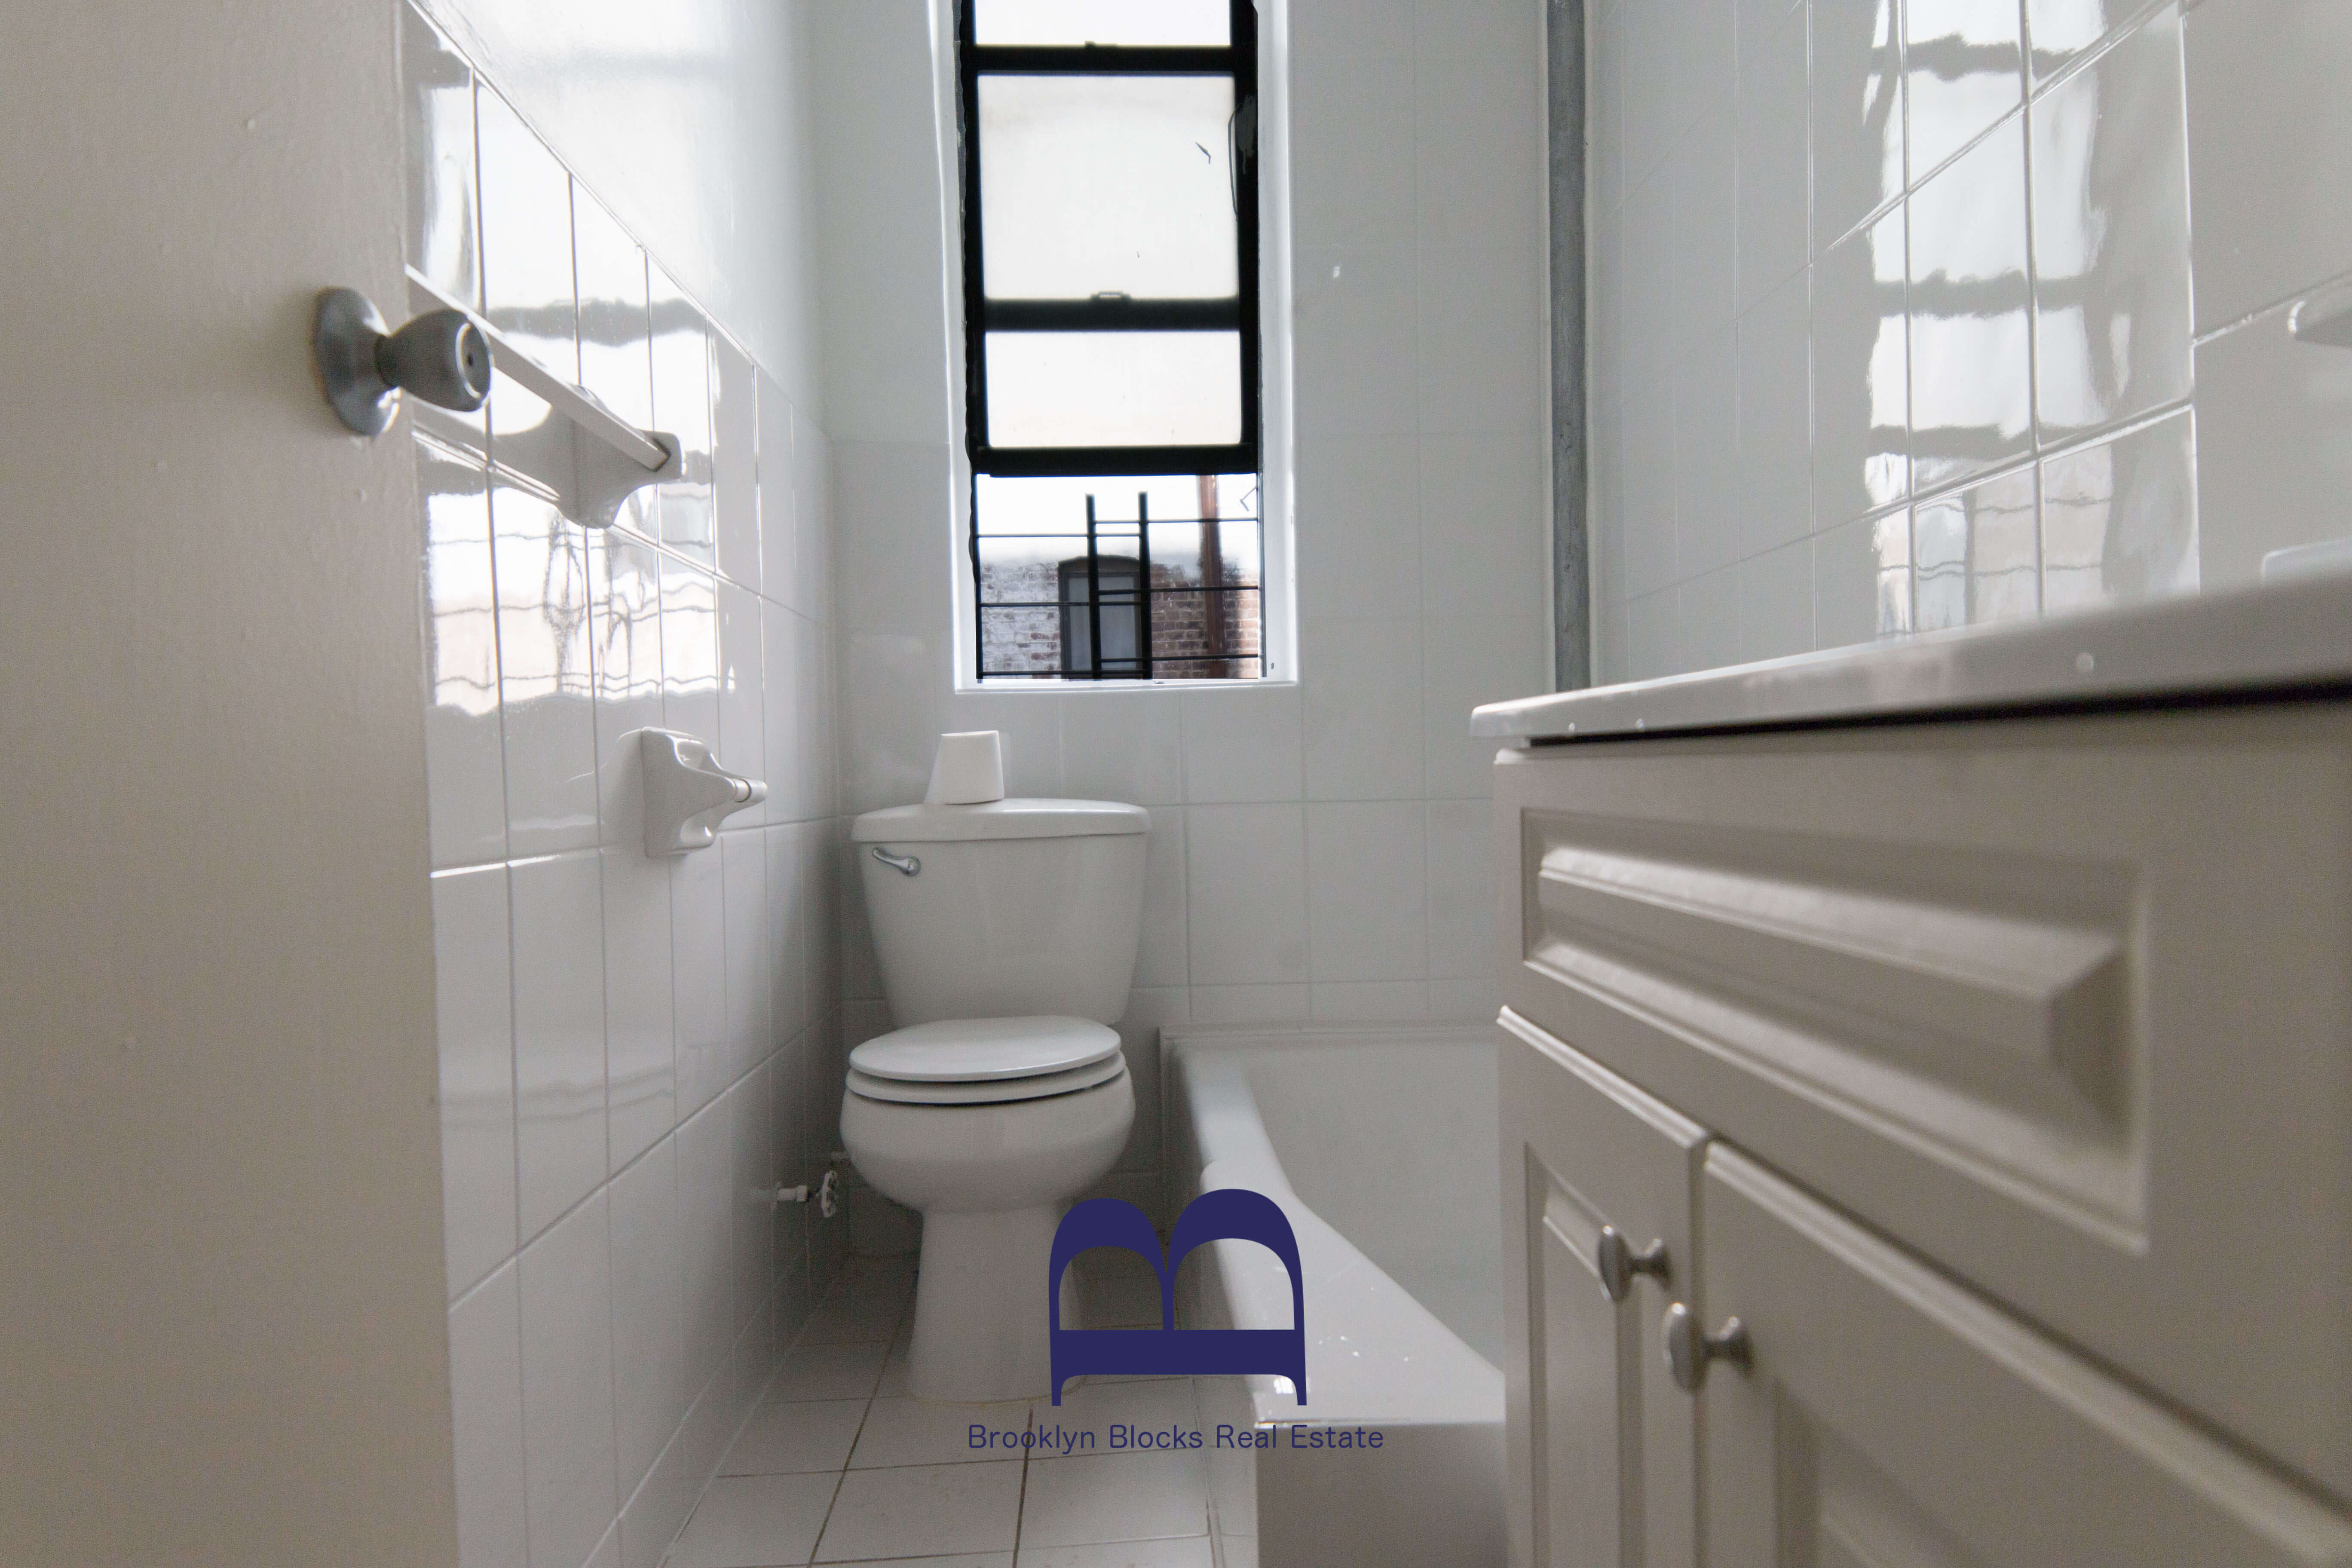 brooklyn-apartments-for-rent-crown-heights-1082-president-street-bathroom